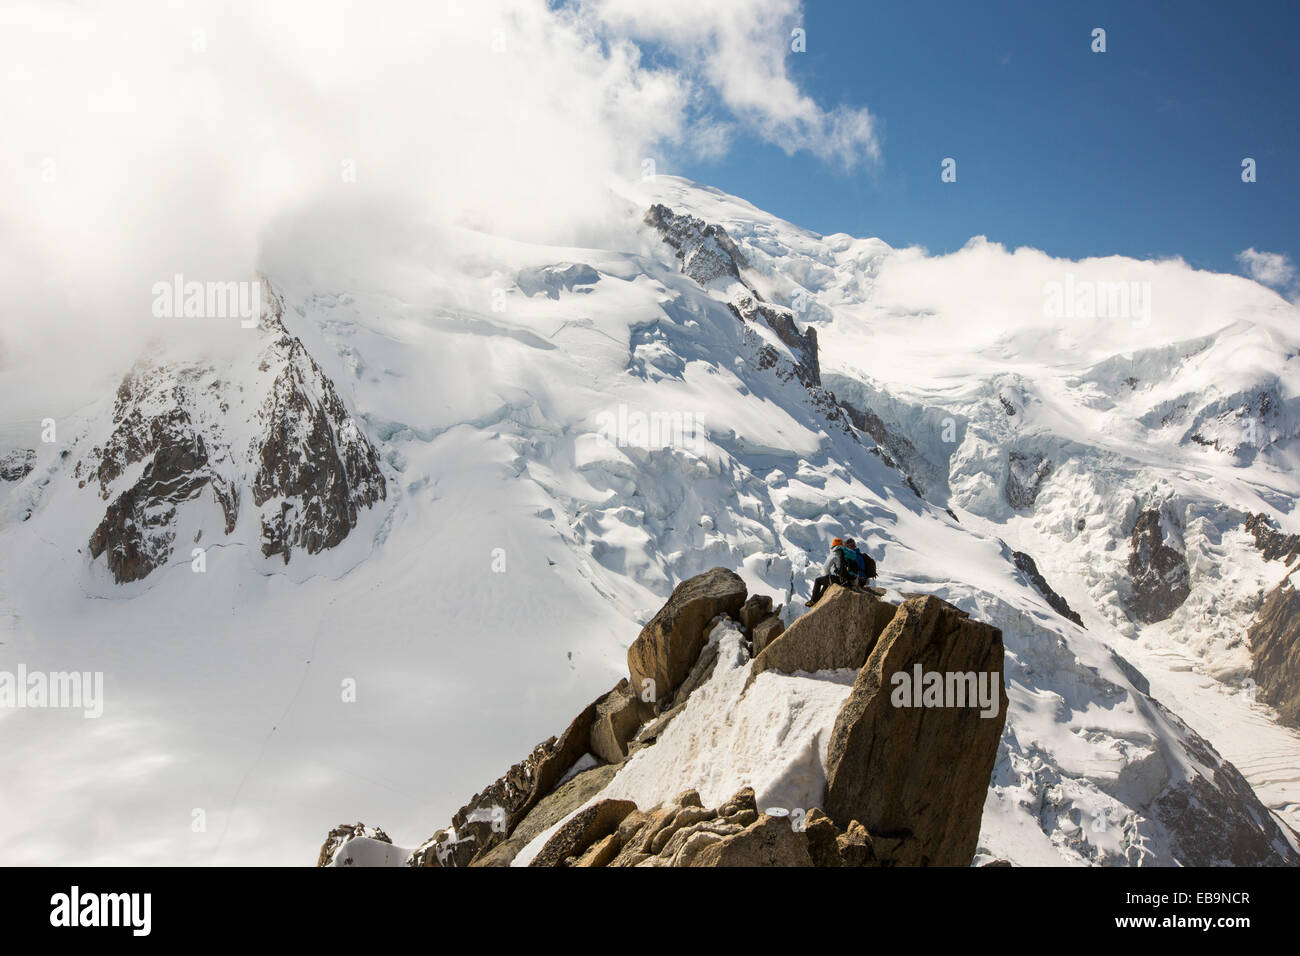 Mont Blanc from the Aiguille Du Midi above Chamonix, France, with climbers on the Cosmiques Arete. Stock Photo